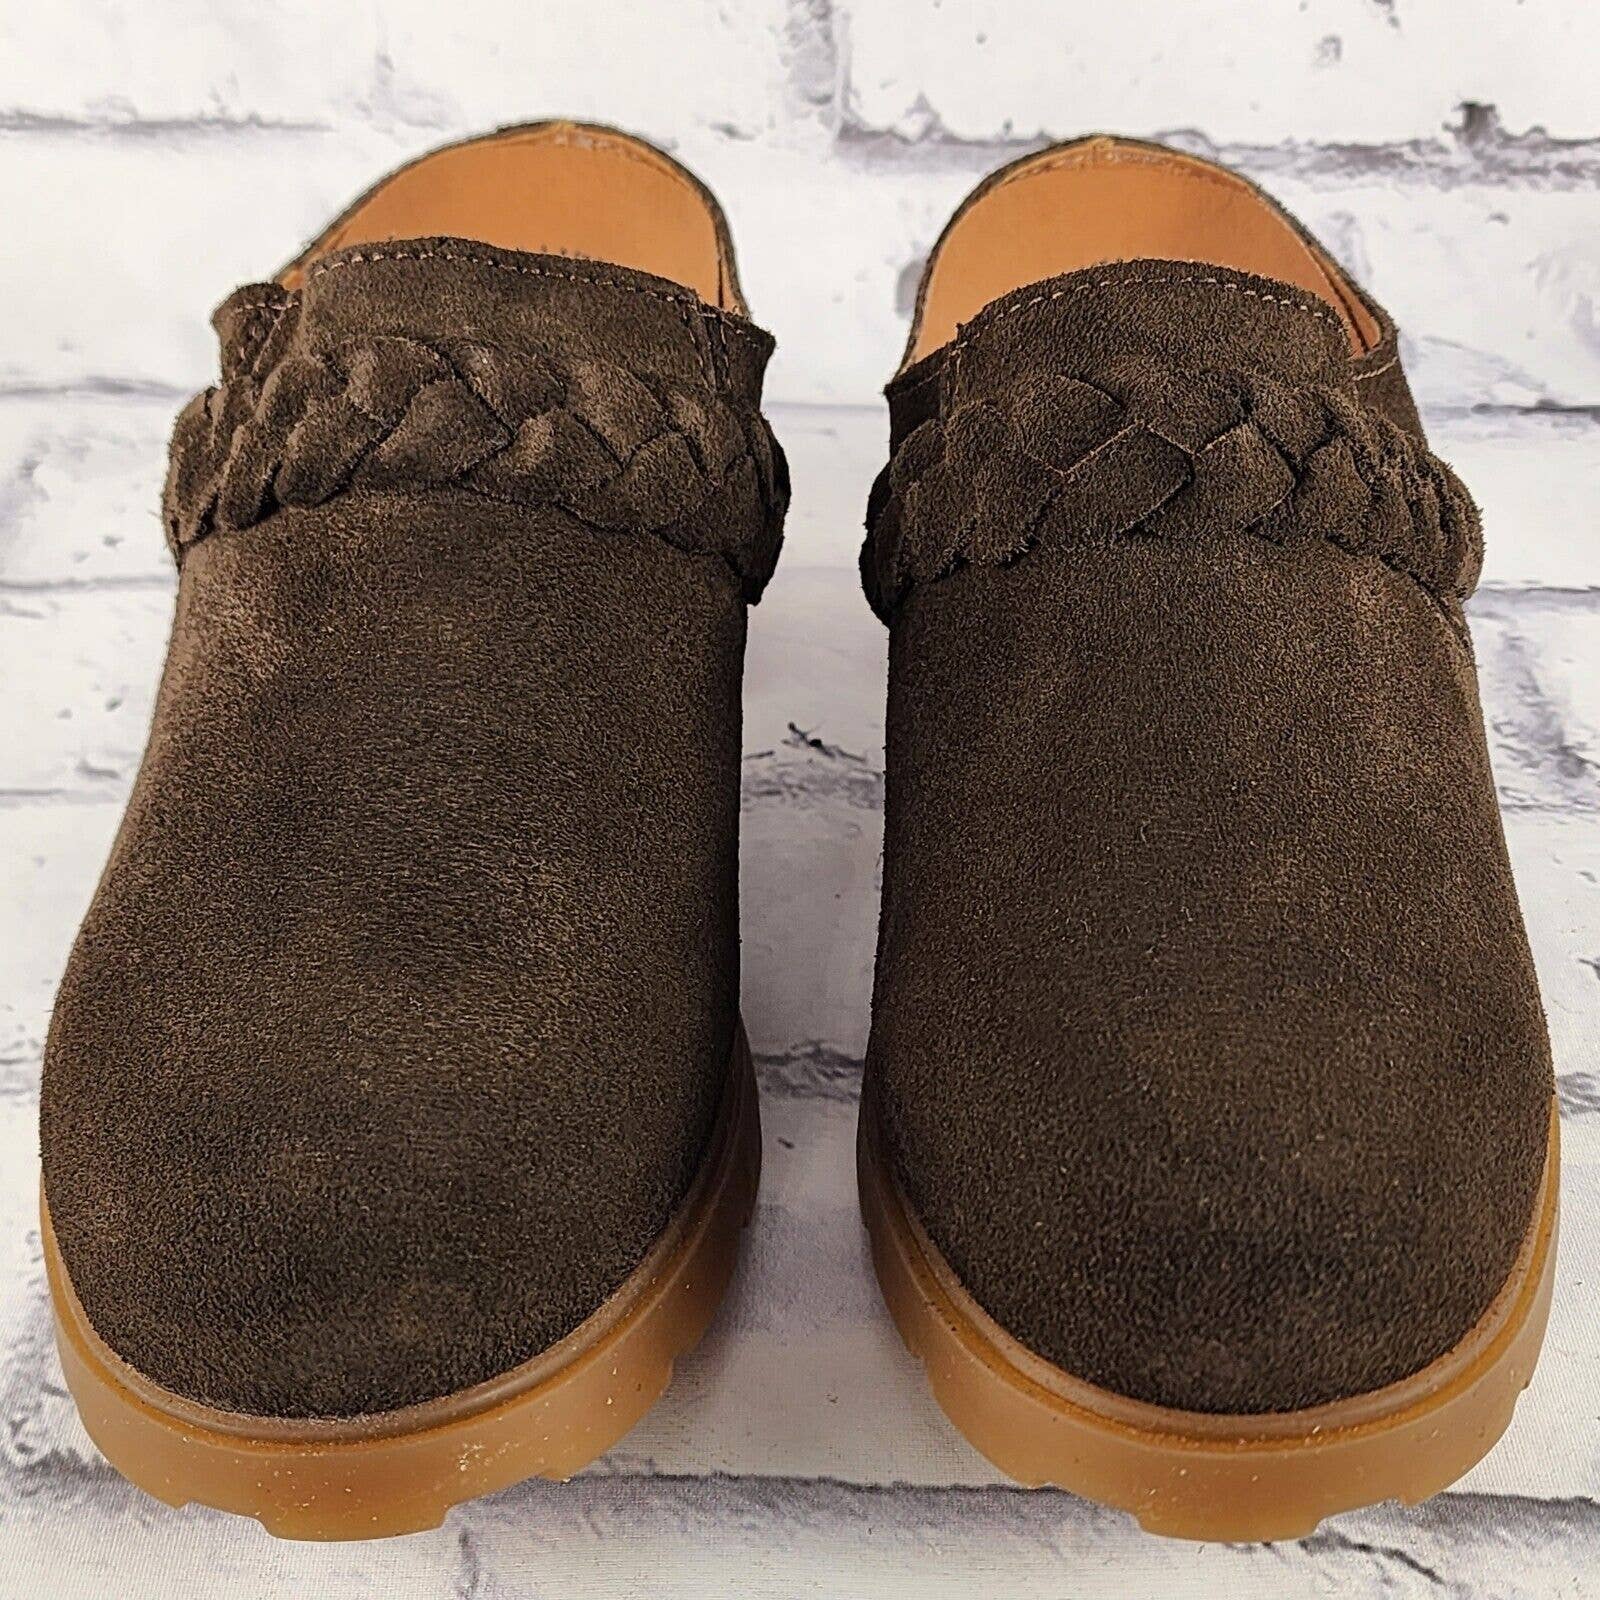 OTBT West Heeled Mules Women's Size 6 M Brown Water Resistant Suede Casual Shoes